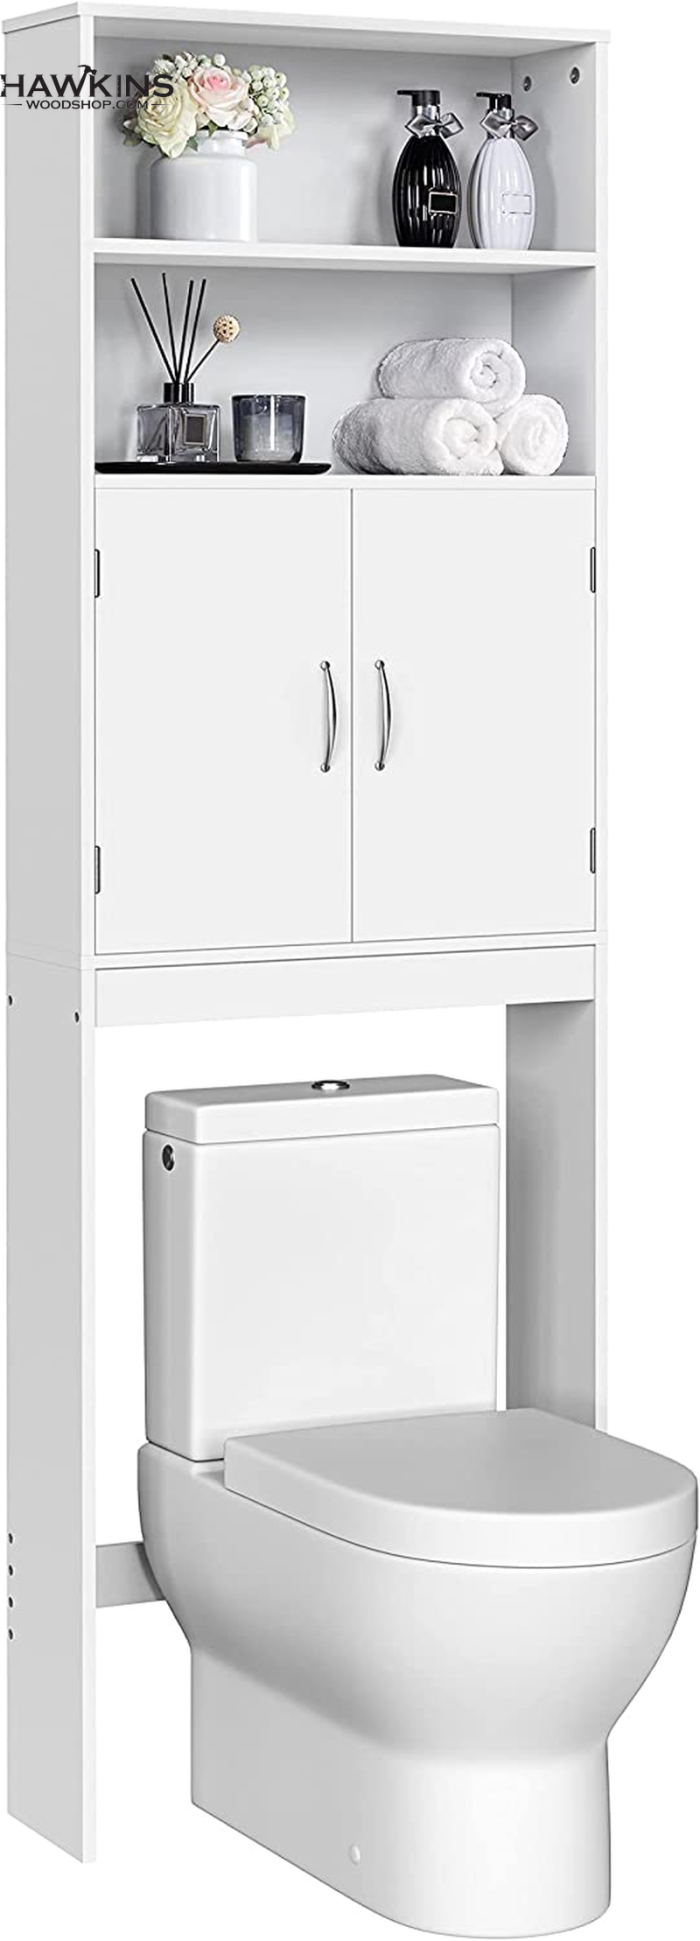  UTEX Bathroom Storage Over The Toilet, Bathroom Cabinet  Organizer with Adjustable Shelves and Double Doors, Wood Bathroom Space  Saver,Espresso : Home & Kitchen